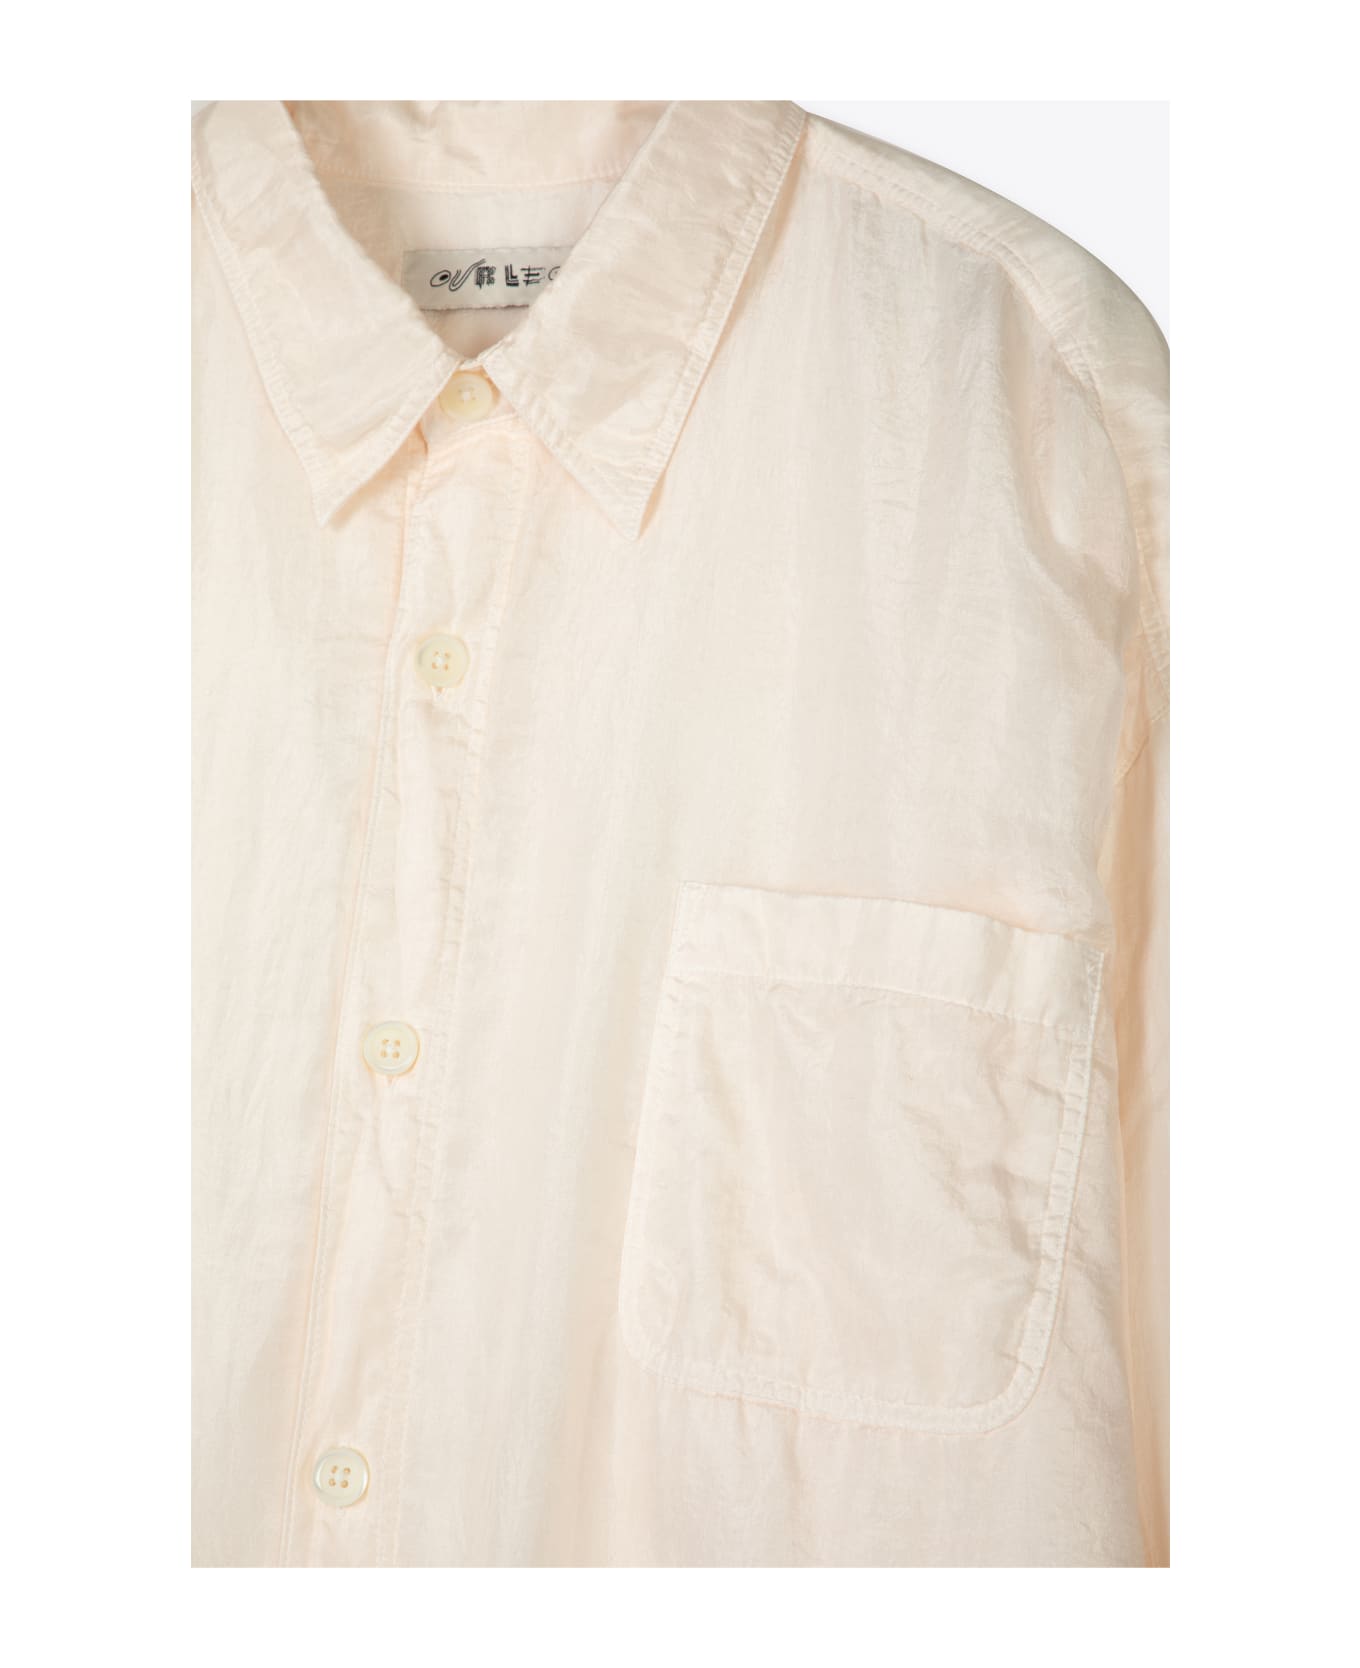 Our Legacy Darling Shirt Champagne Silk Blend Shirt - Darling Shirt - Champagne Cotton Silk